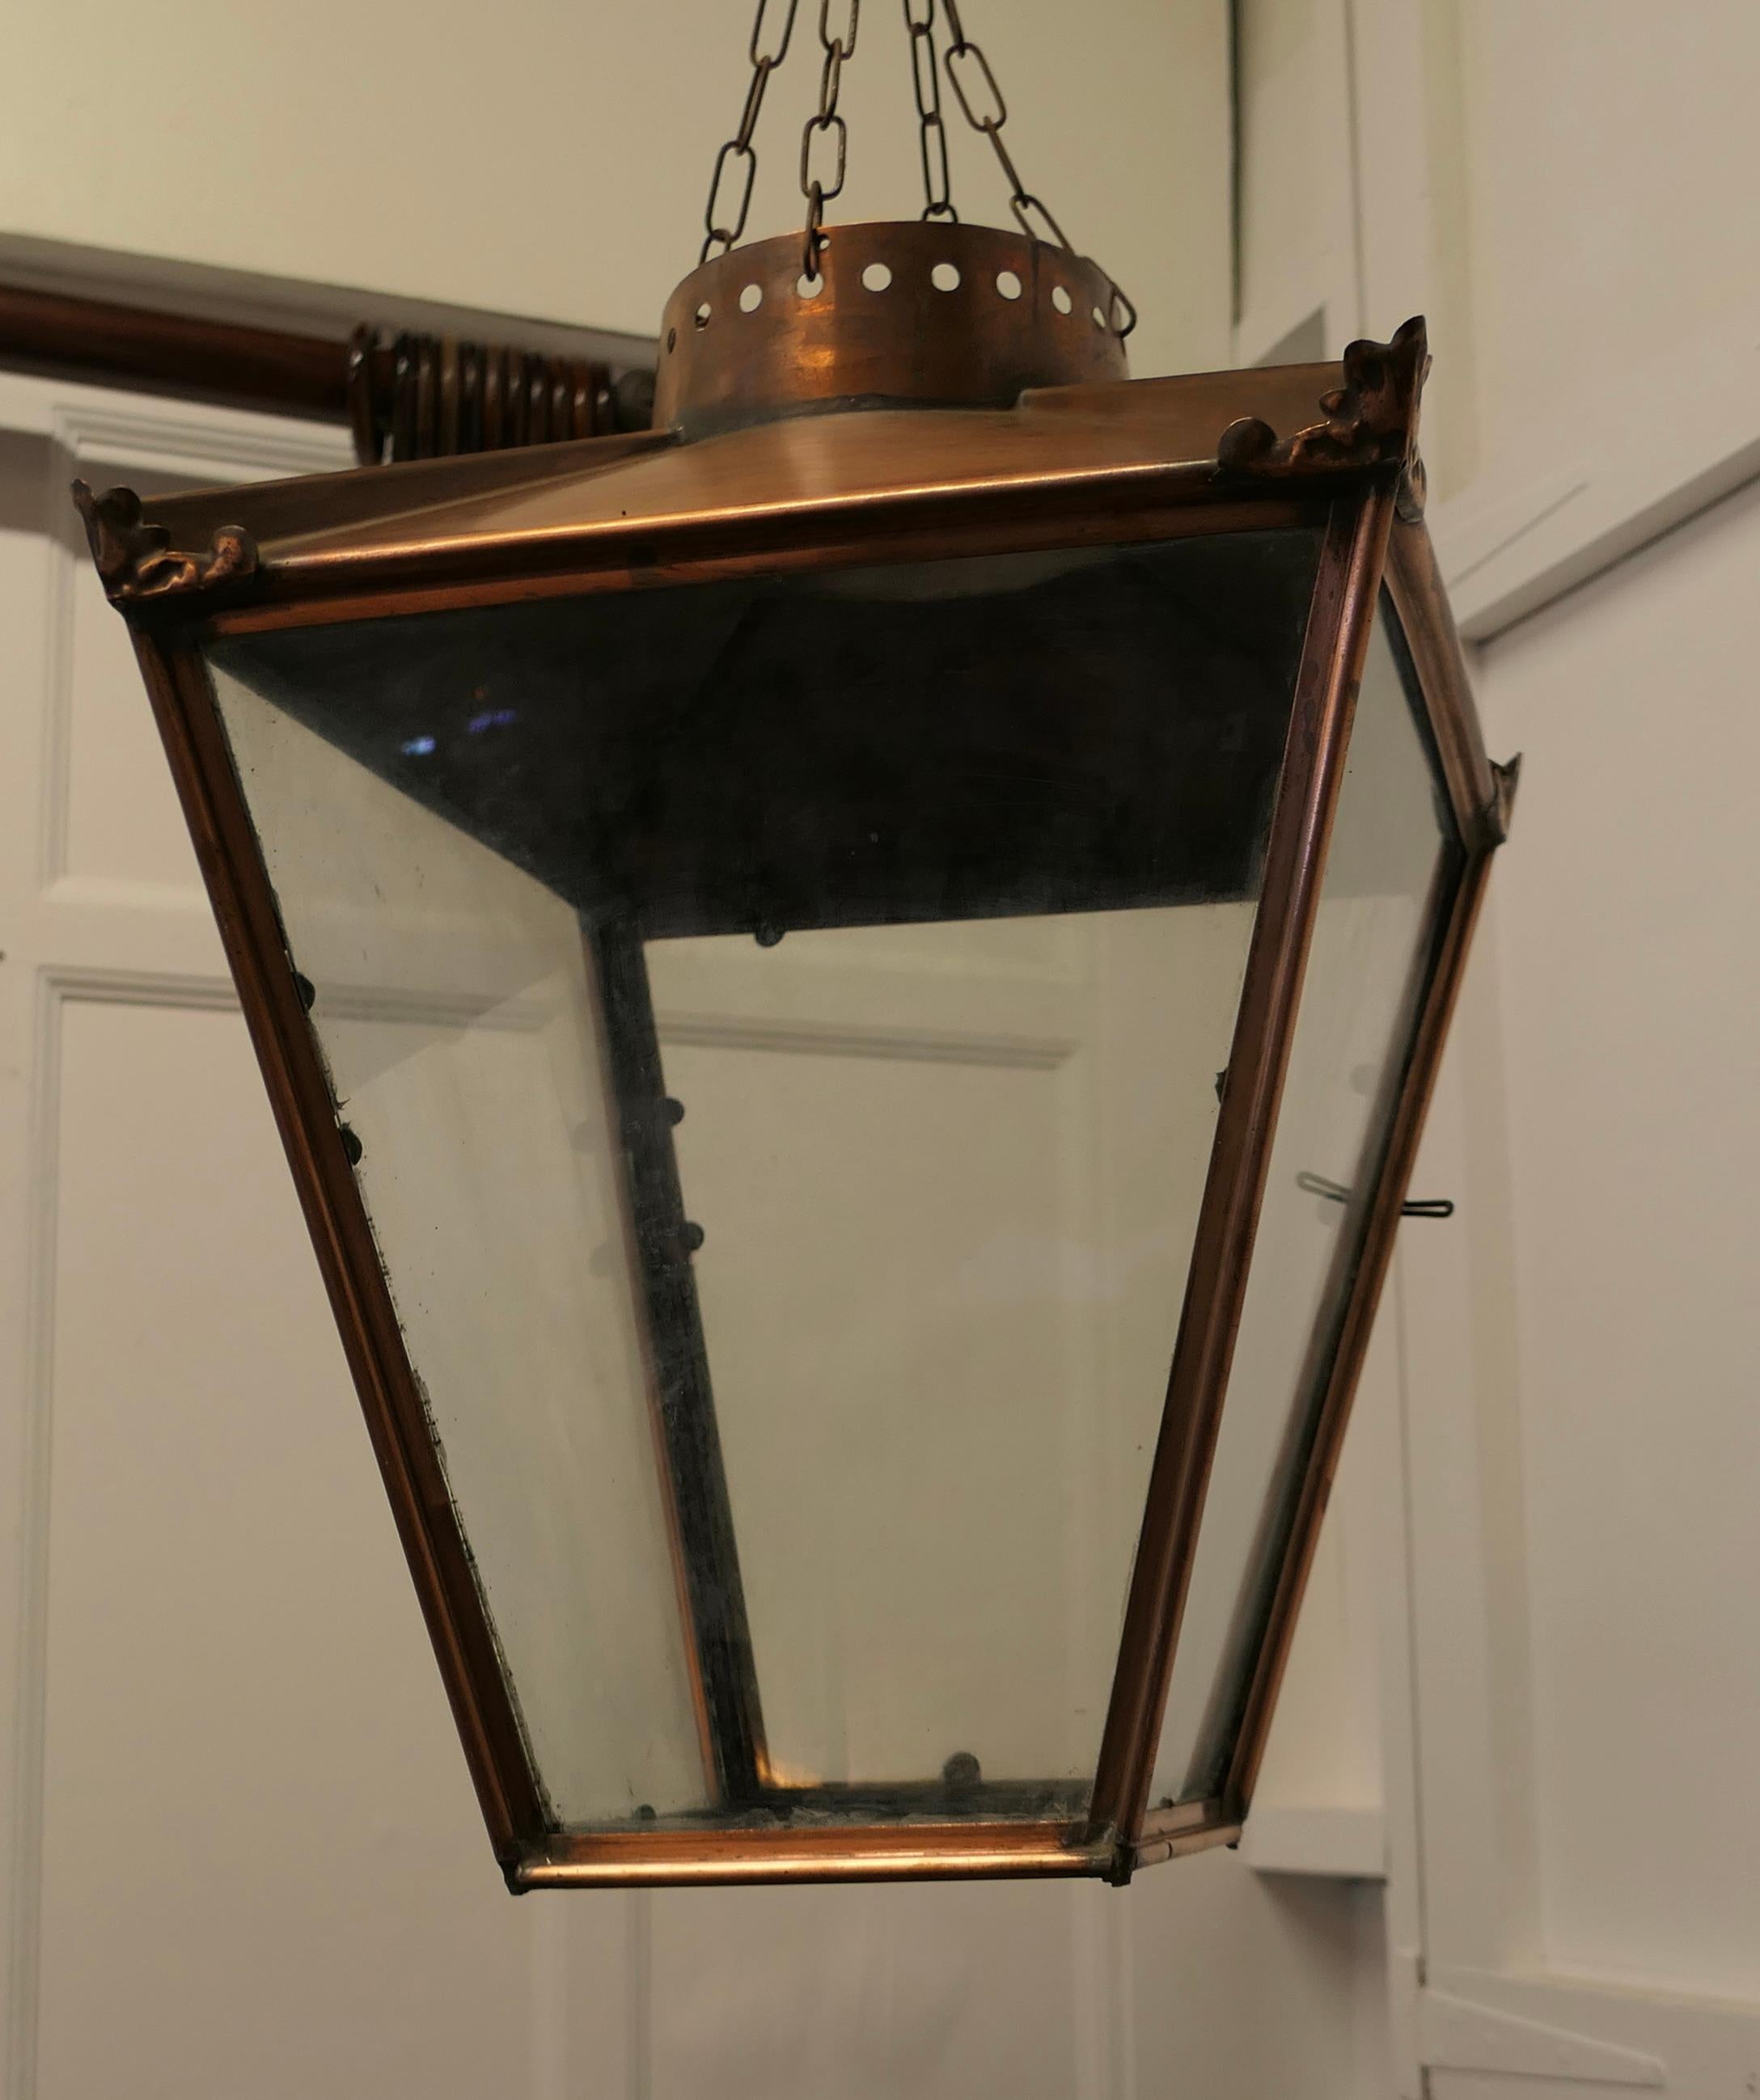 Large Copper Hanging Lantern Lampshade

This is a Lampshade in the form of a Large Copper street light, the Lantern it has a natural oxidised patina, it has glazed sides and at the bottom and it hangs on 4 chains from above
The copper work is old